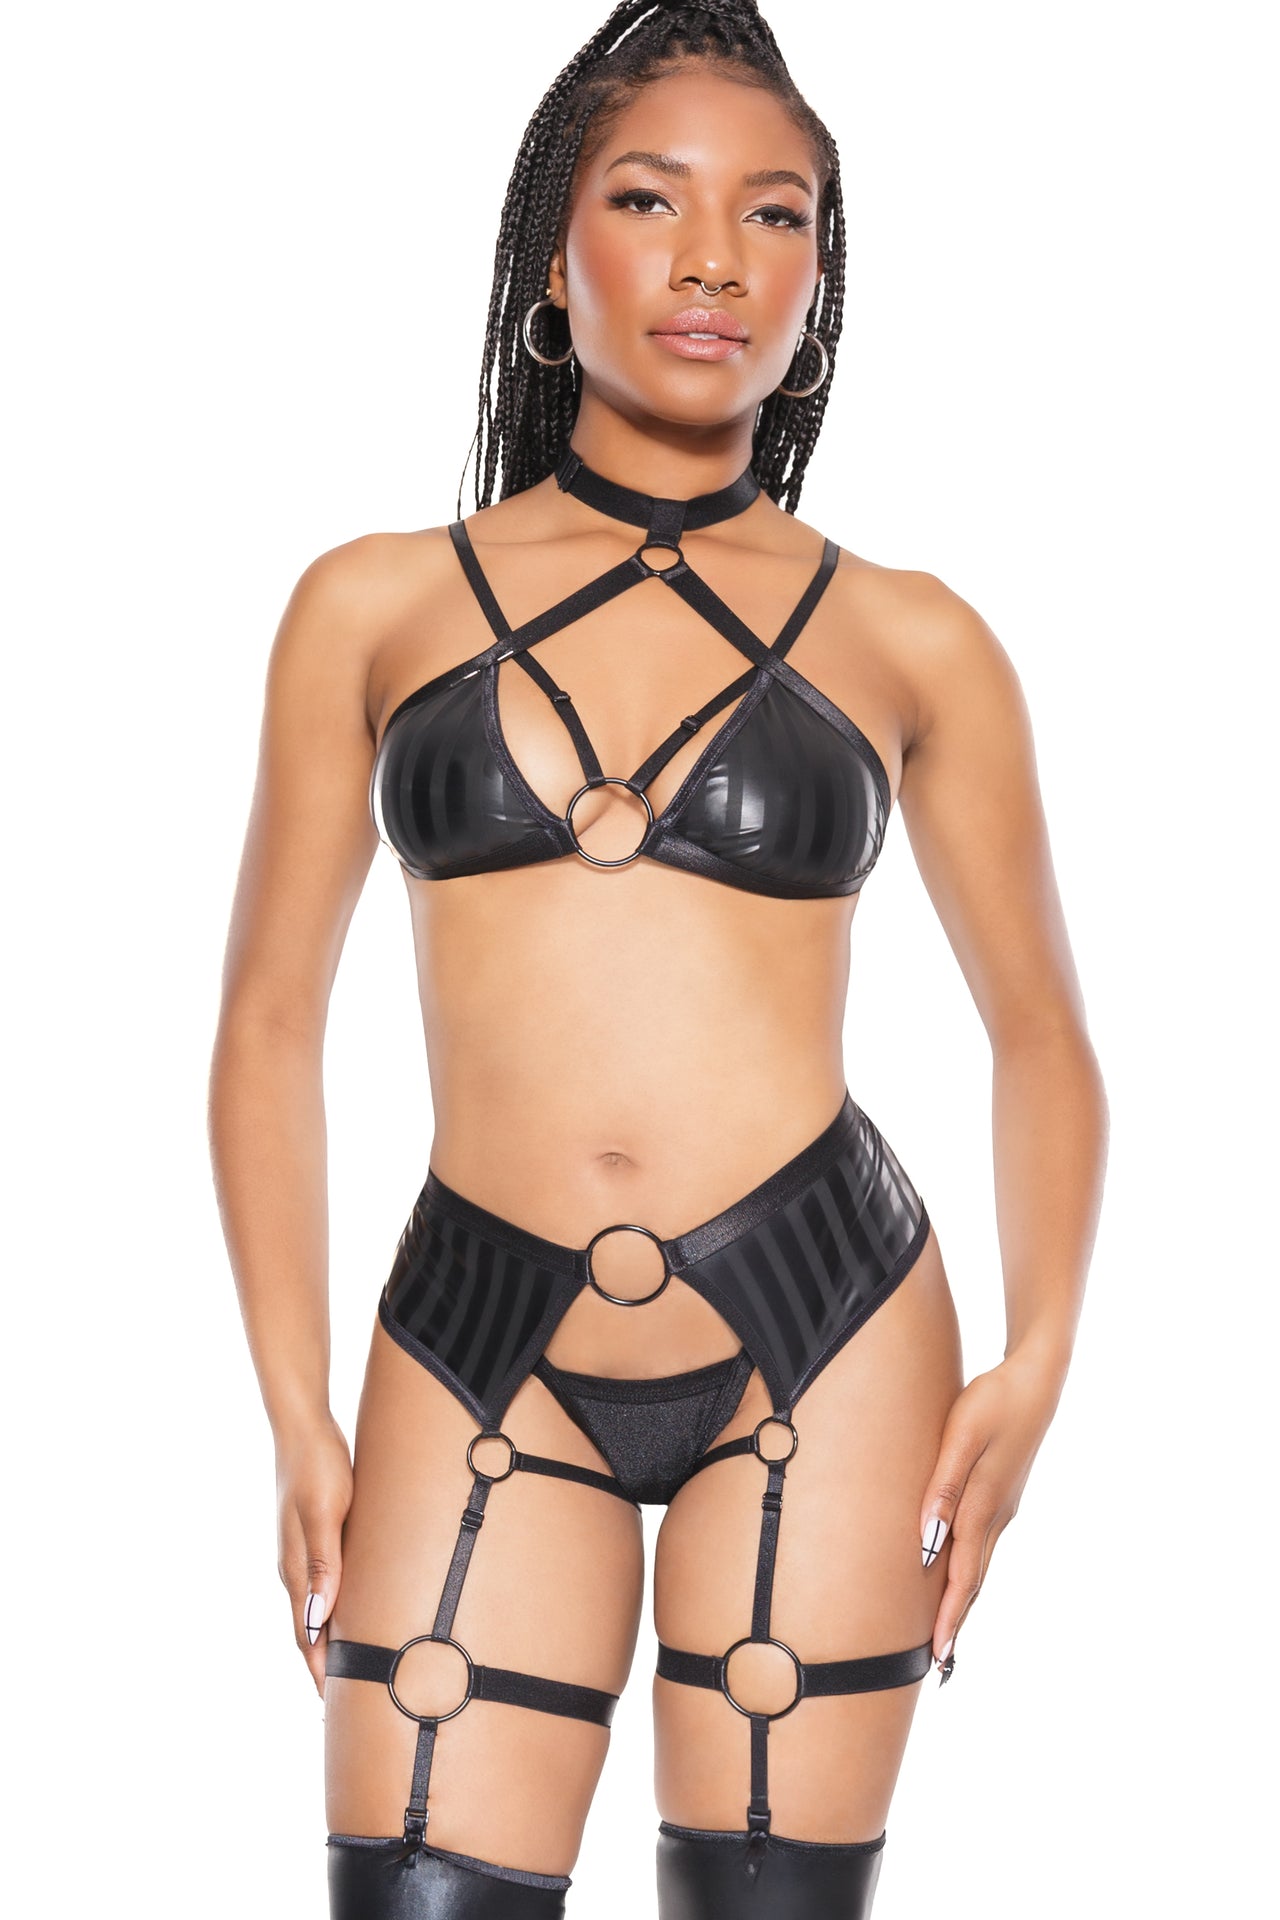 Coquette - 22216 - Halter Top & Crotchless Garter Panty - Black - OS - Stag Shop